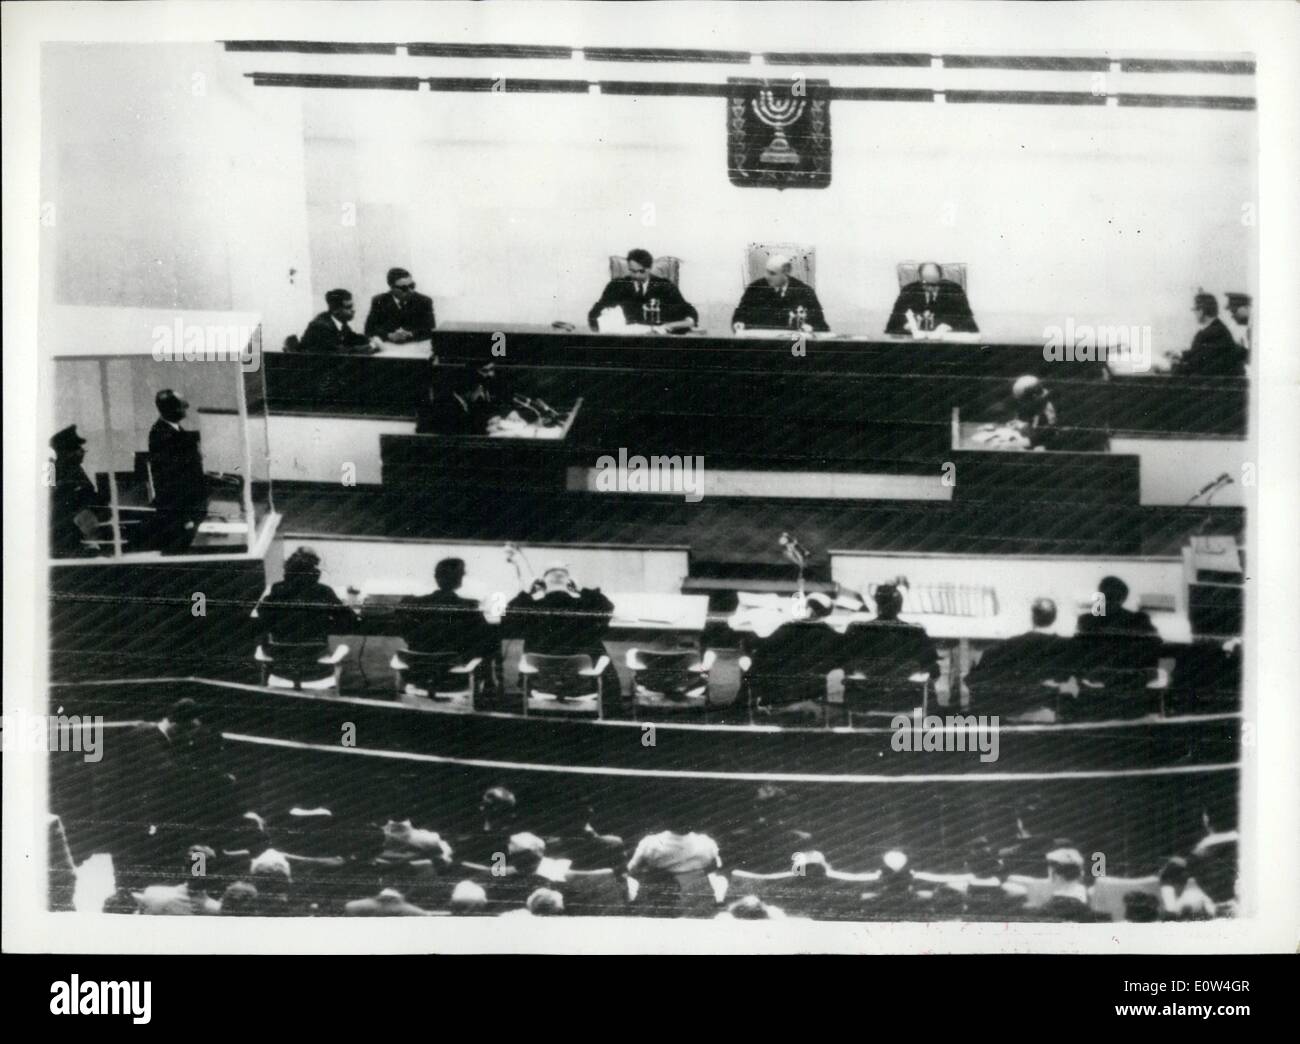 Apr. 04, 1961 - Opening of the Adolf Eichmann trail - in Jerusalem. The trial opened this morning in Jerusalem of Adolf Eichmann - former Nazi s.s.colonel - on charges of the mass murder of millions of Jews - in concentration camps during the war. photo shows General view of the scene in the courtroom - at opening of the trial this morning. Adolf Eichmann can be seen in his special bullet proof dock - on left center back is president of the court Moshe landau, with the other tribunal members - judge Halevi (left) and Judge raveh (right) Stock Photo